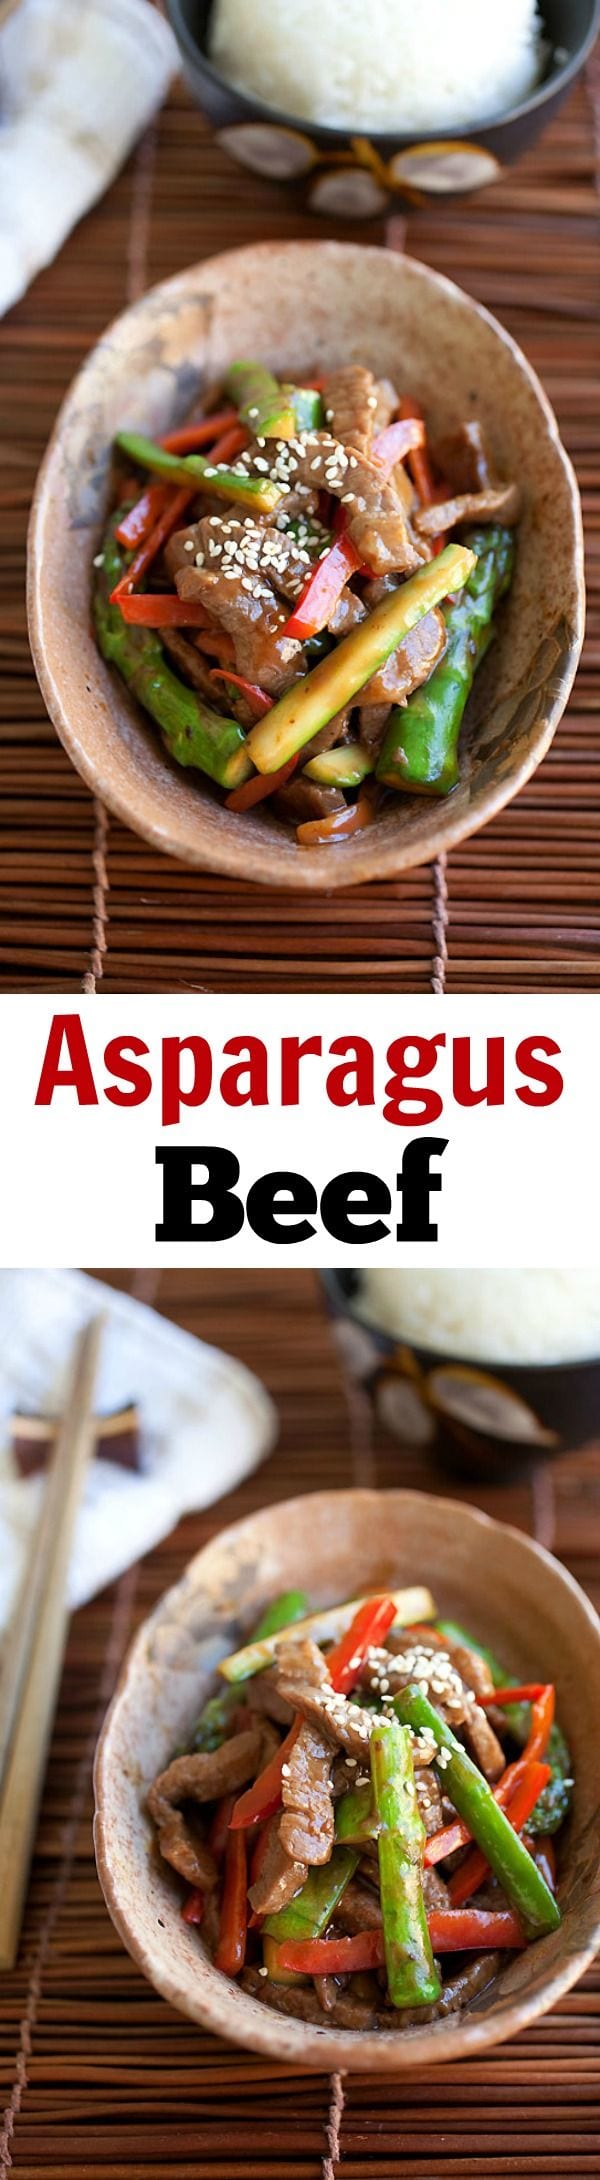 Asparagus beef is a Chinese recipe made with asparagus and beef in yummy brown sauce.  This recipe takes 20 mins | rasamalaysia.com